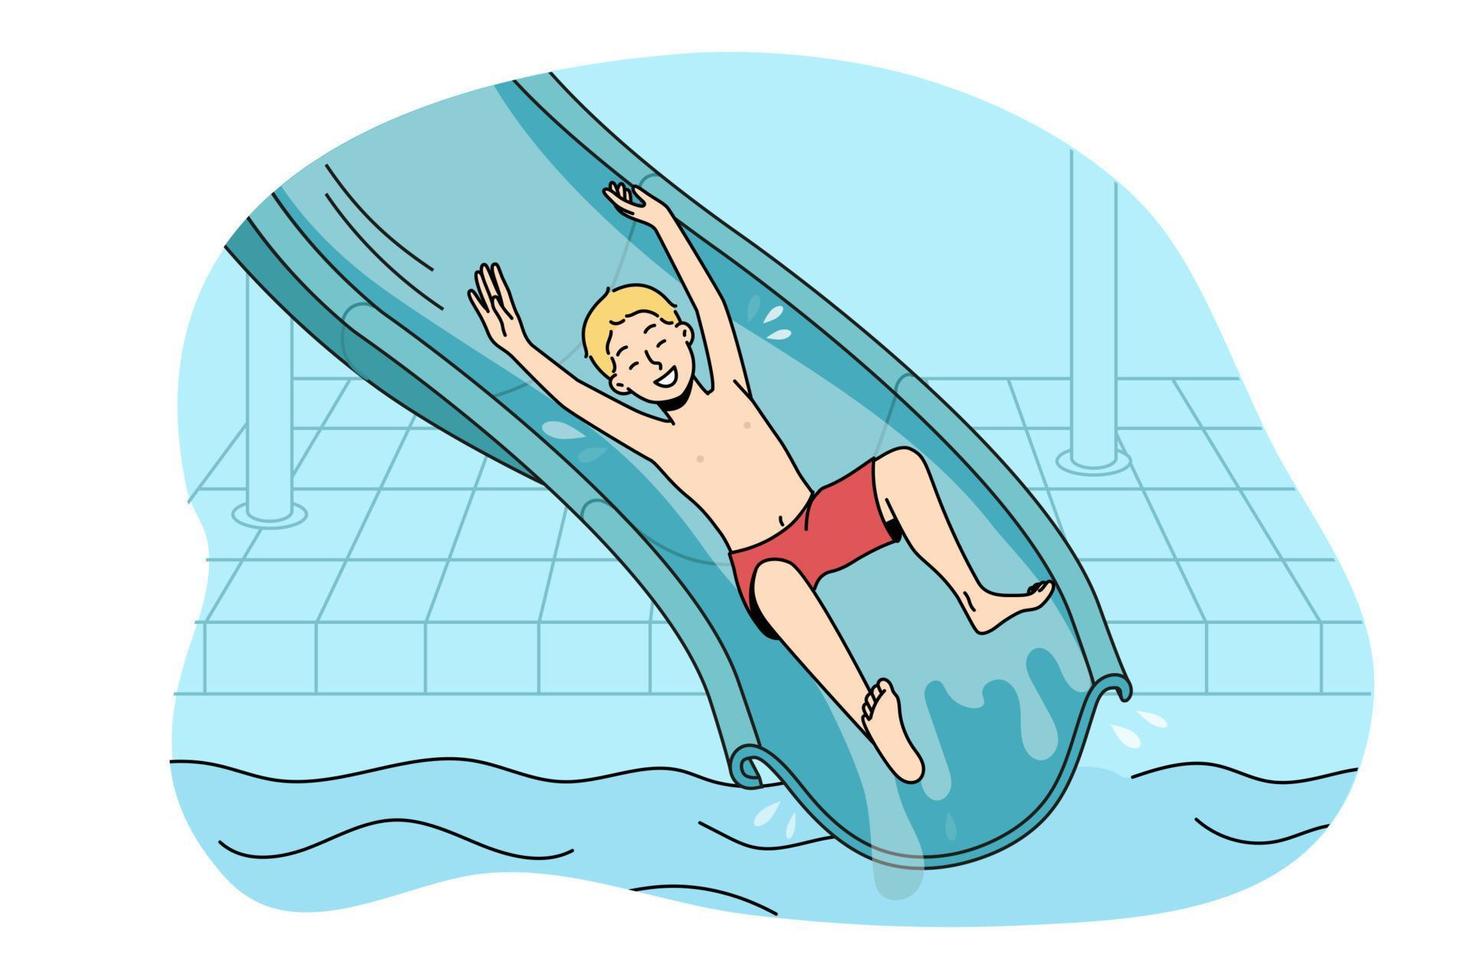 Overjoyed small boy riding from slide in aqua park. Smiling kid have fun enjoy water outdoor attractions in water park. Summer vacation. Vector illustration.